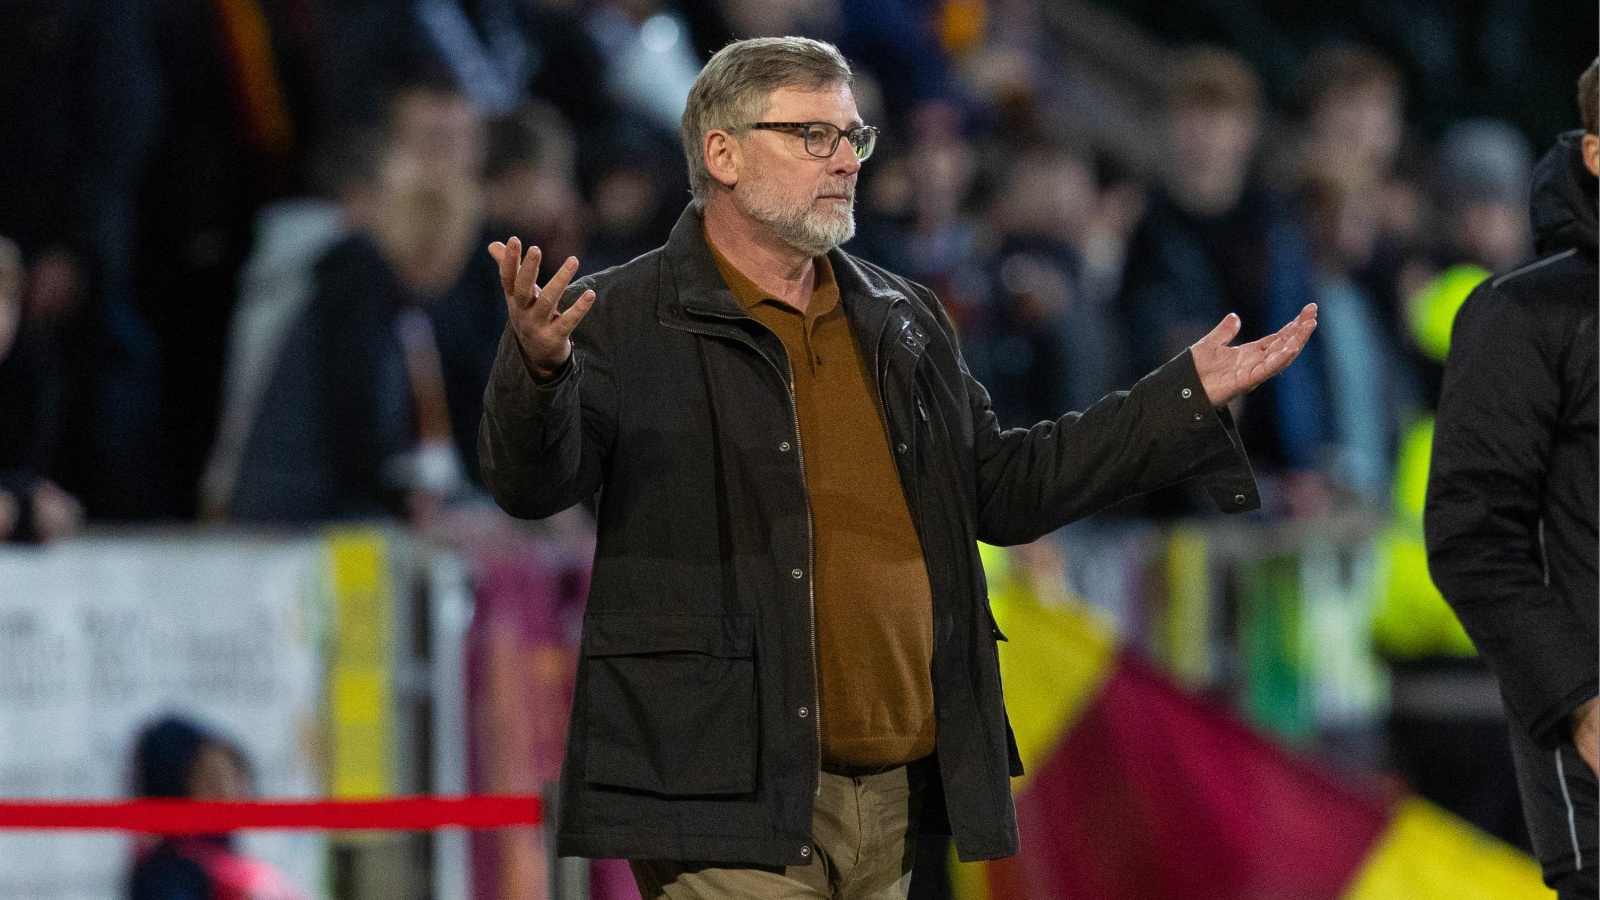 Craig Levein hoping to be 'roundly booed' by Hearts fans on return to Tynecastle | STV News